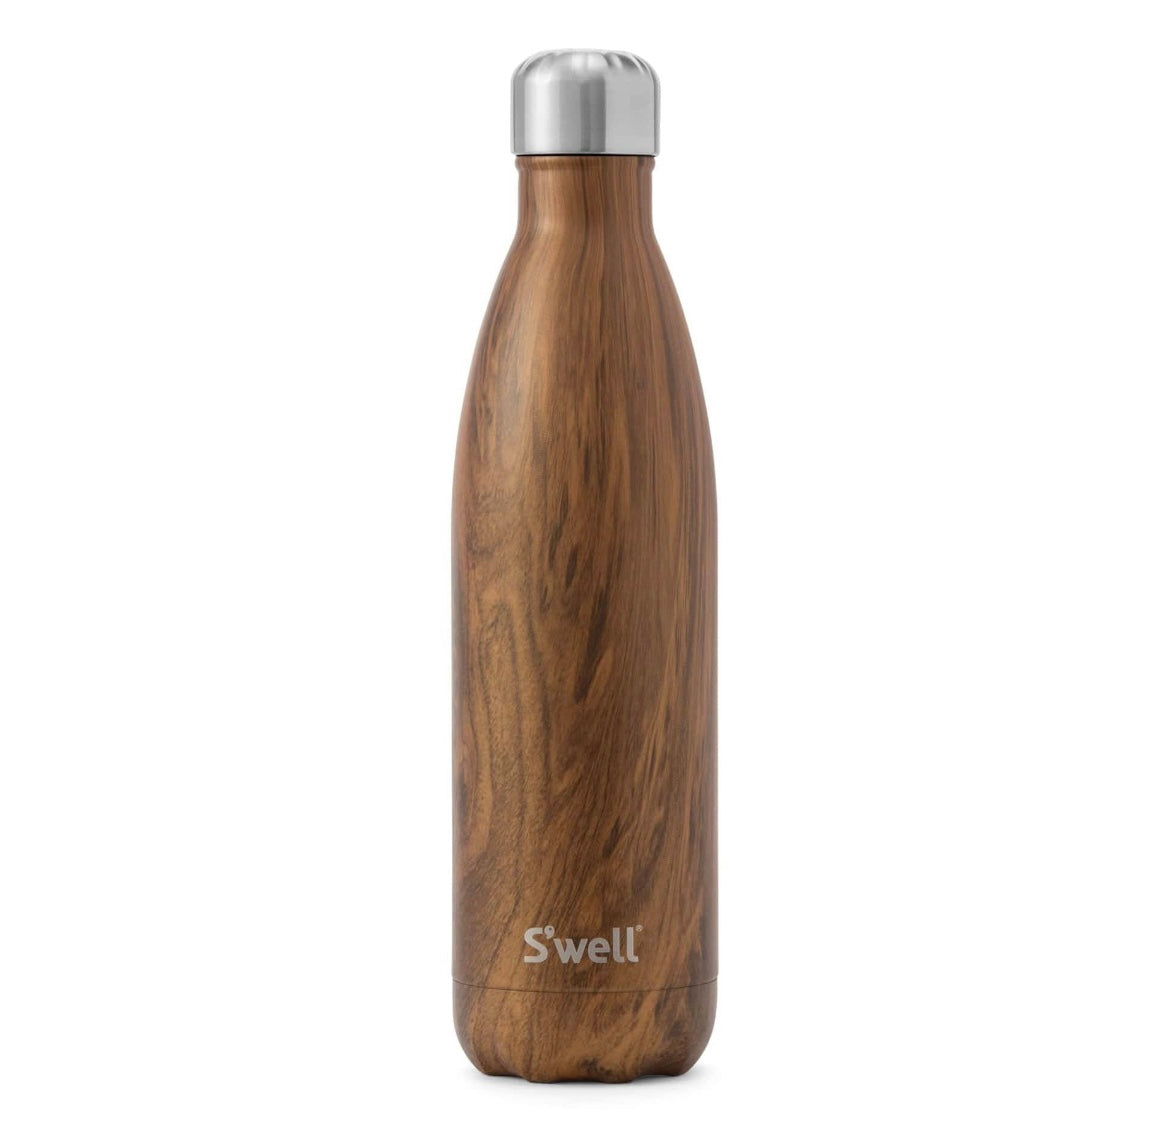 S'well Water Bottles (4 Colors to Choose From)